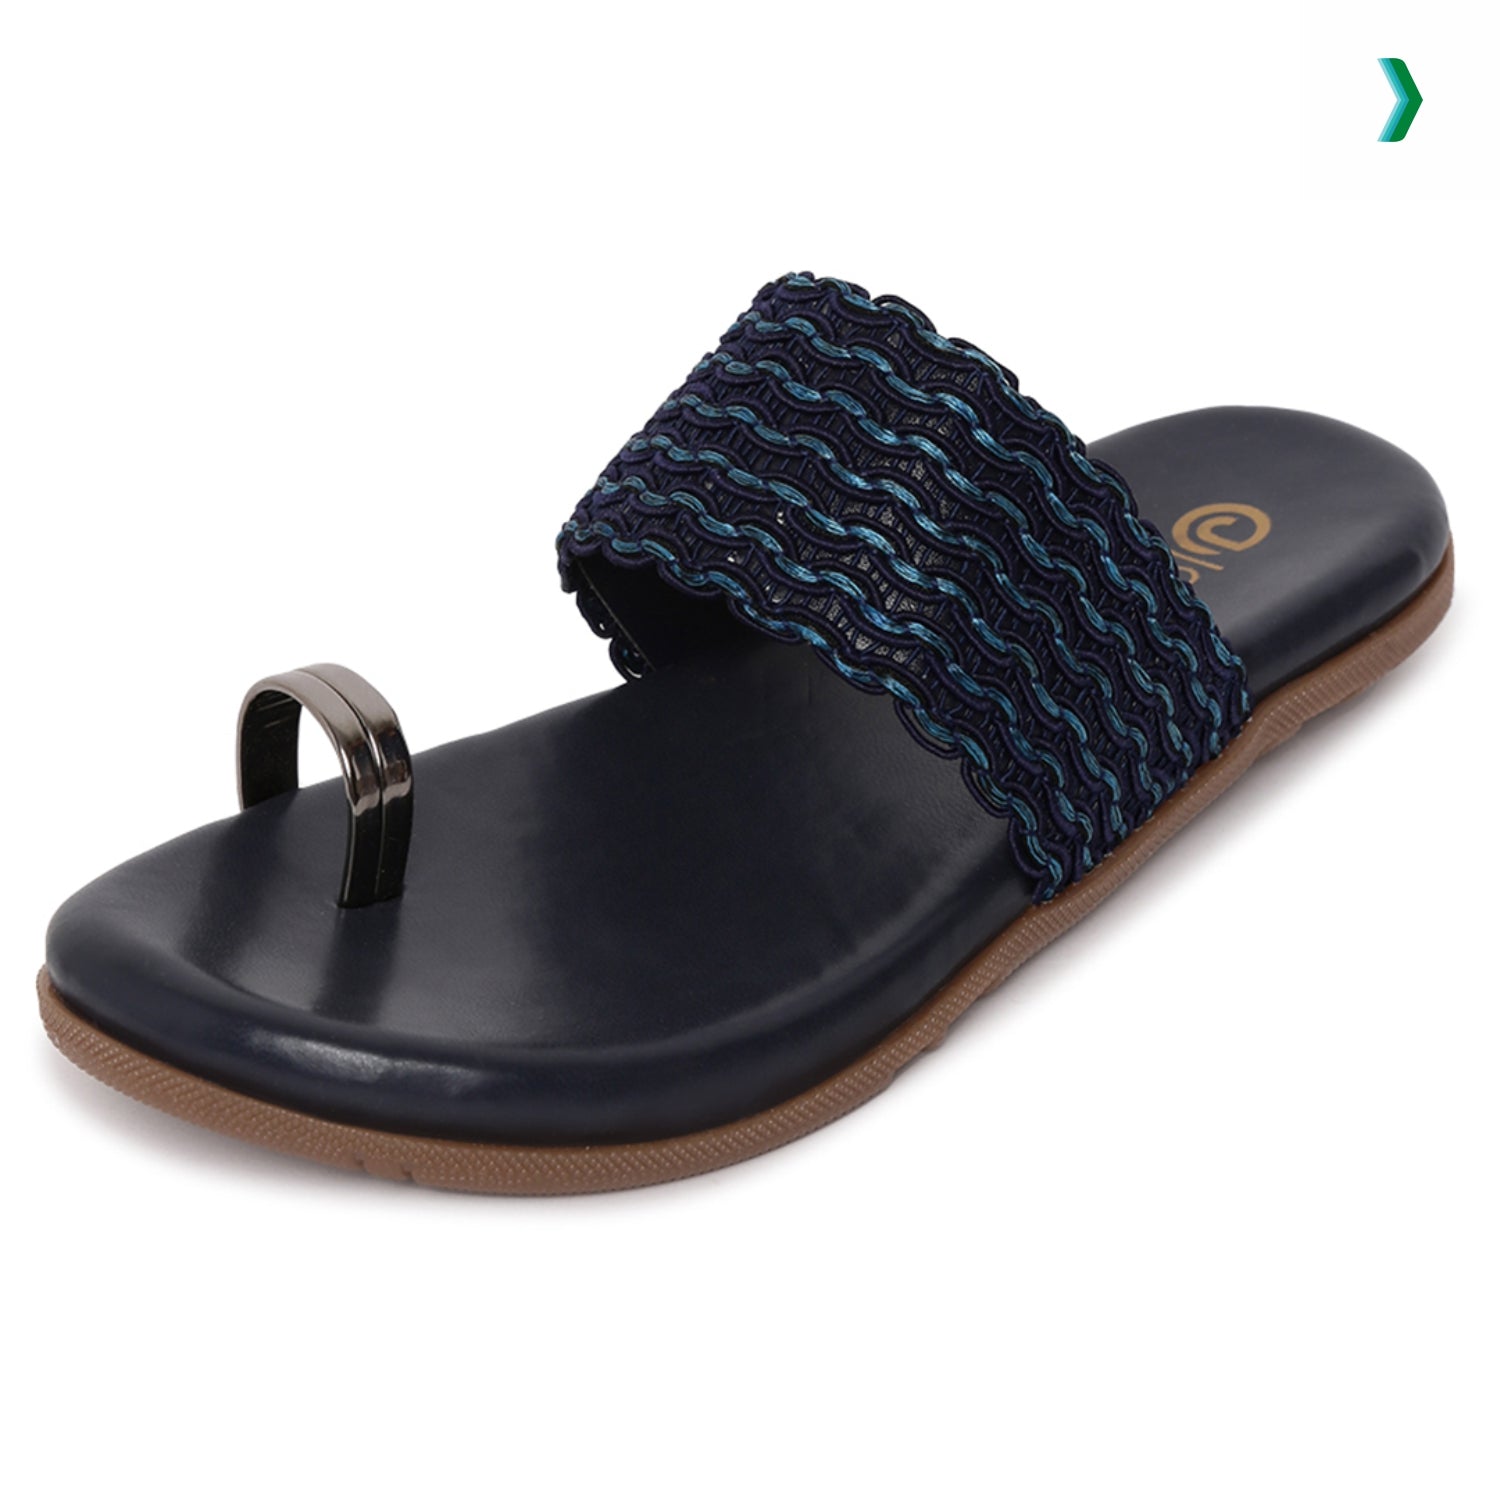 soft chappal for ladies, doctor slippers, ladies flat sandals